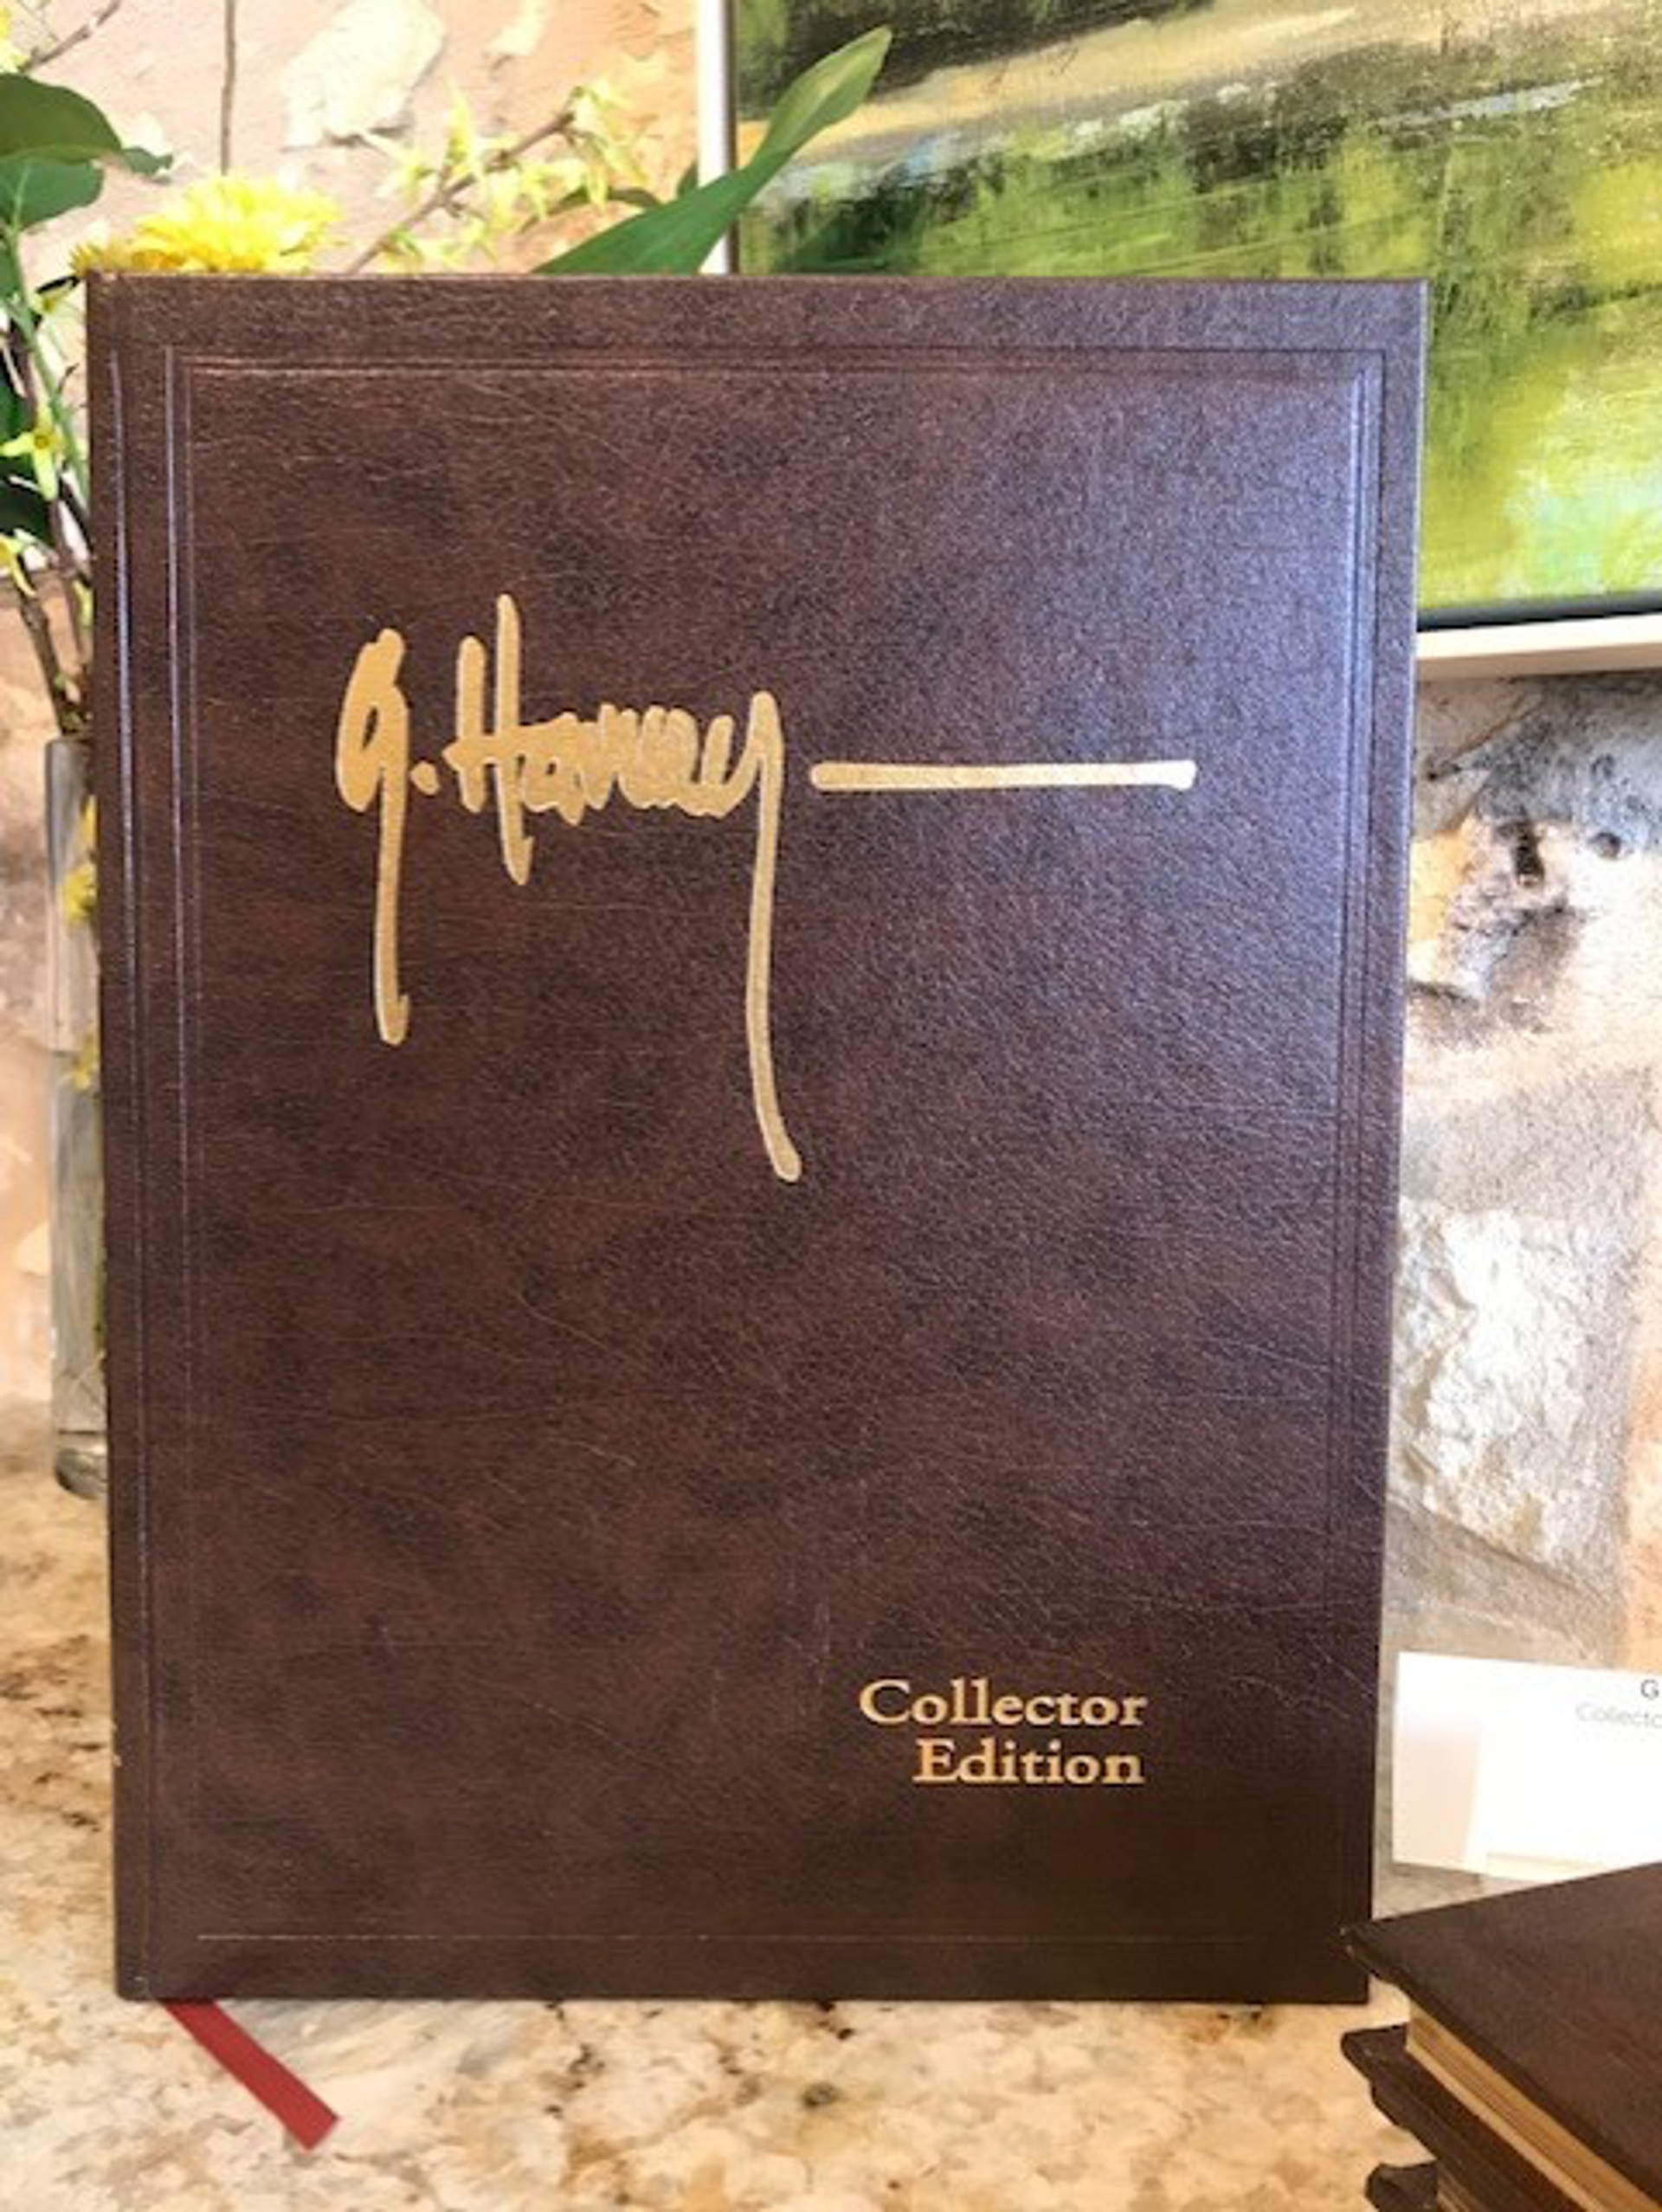 Collector Edition by G. Harvey